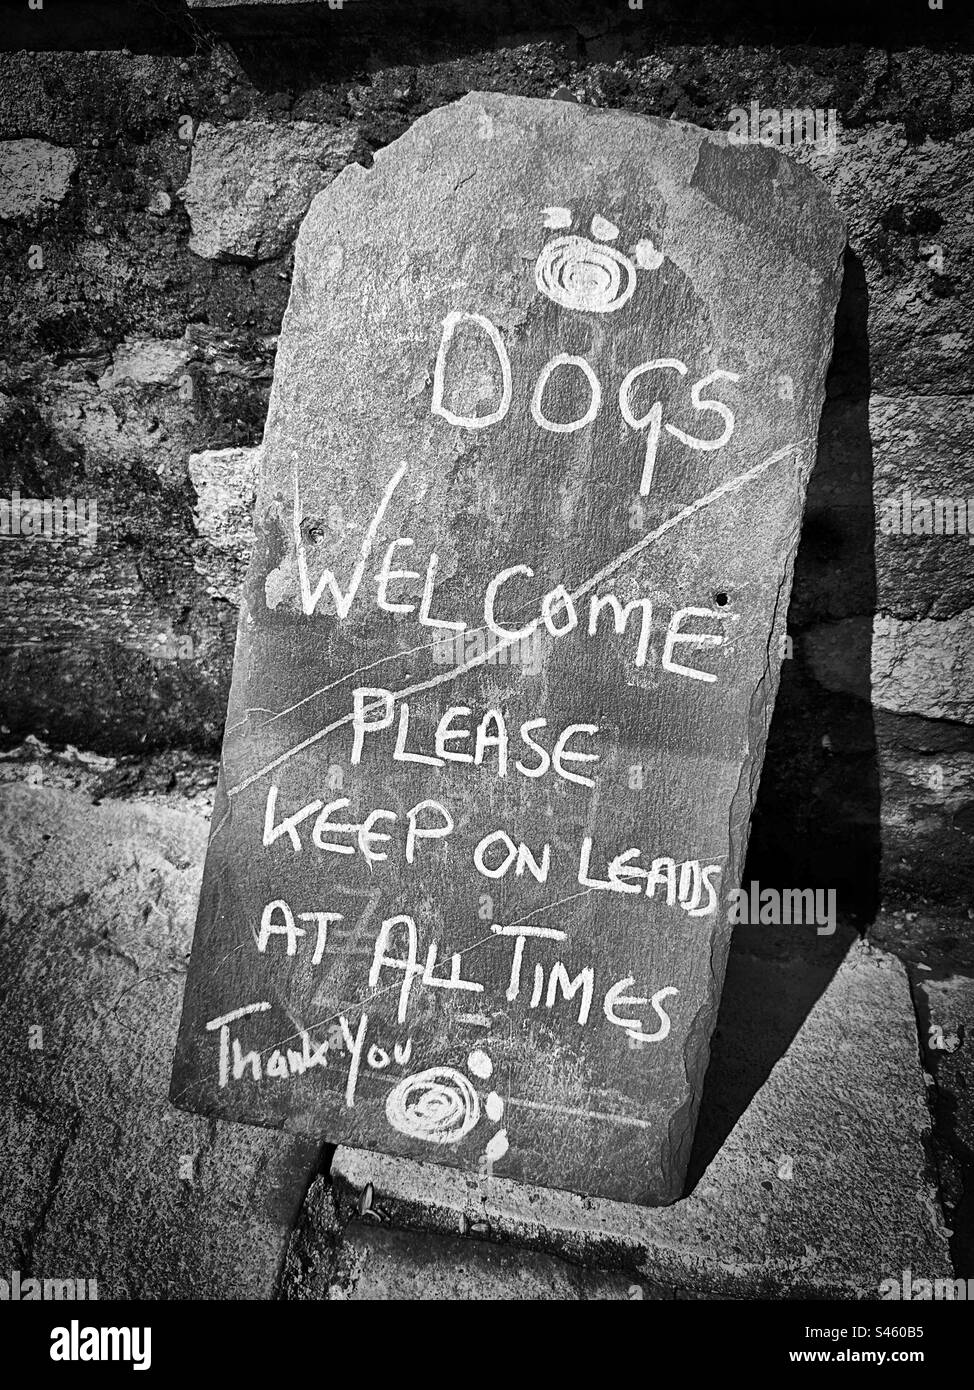 ‘Dogs Welcome’ a handwritten sign invites dogs and their owners inside… as long as they are on a lead at all times. (Black & White) Stock Photo